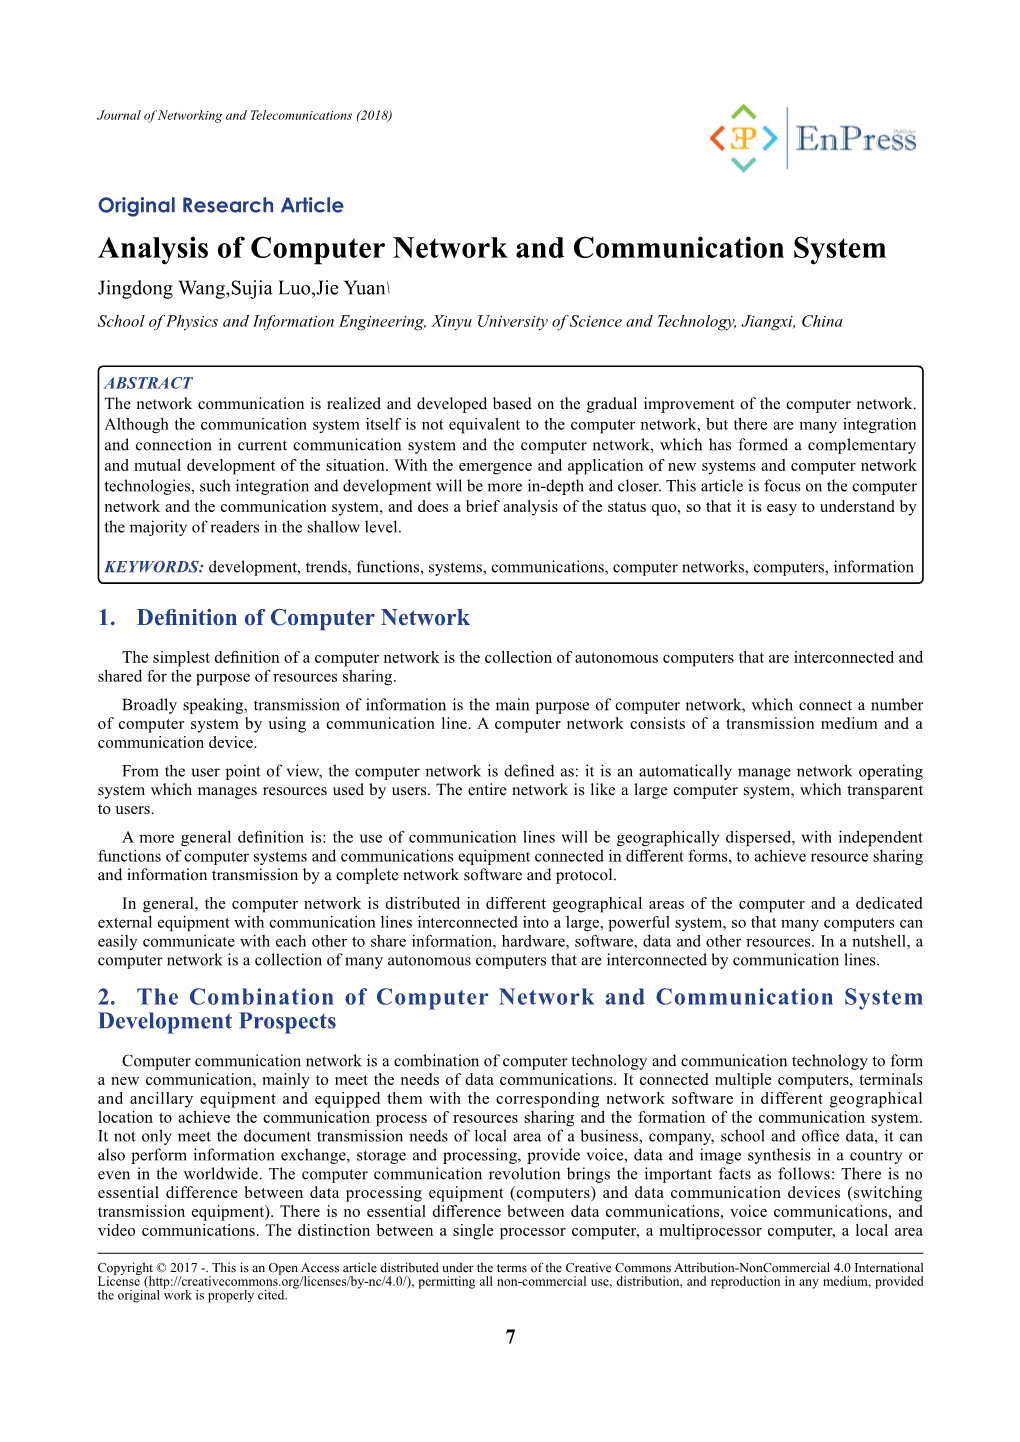 Analysis of Computer Network and Communication System